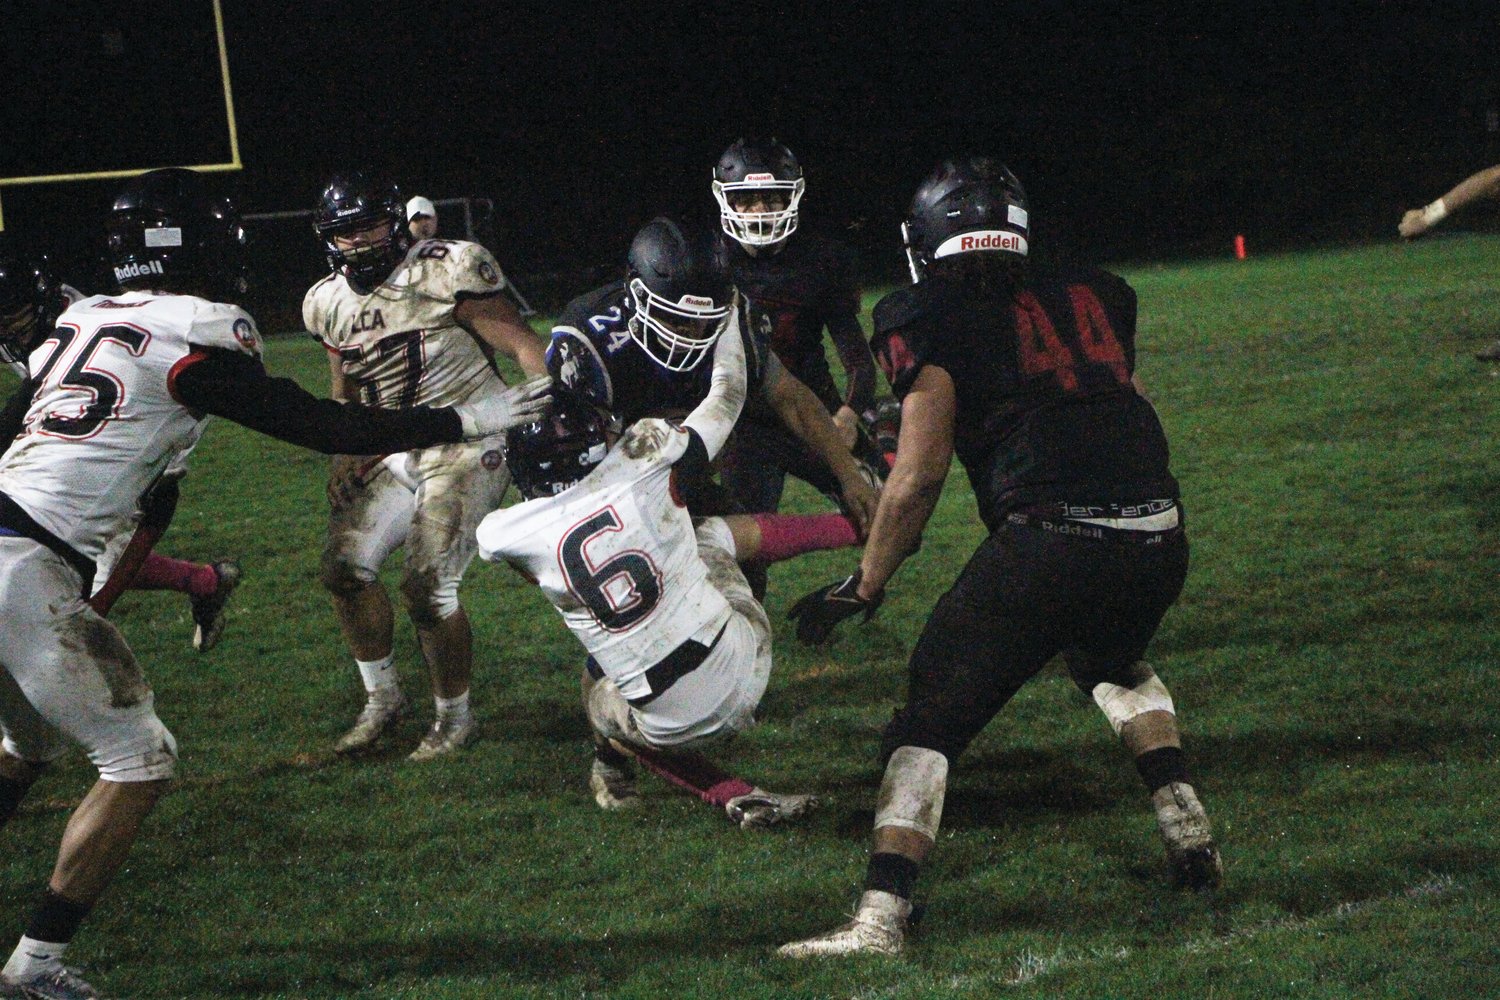 Anson Jones, the Rivals’ senior fullback, trucks an opponent to gain a first down. Jones had 27 rushing yards and a touchdown on the night.